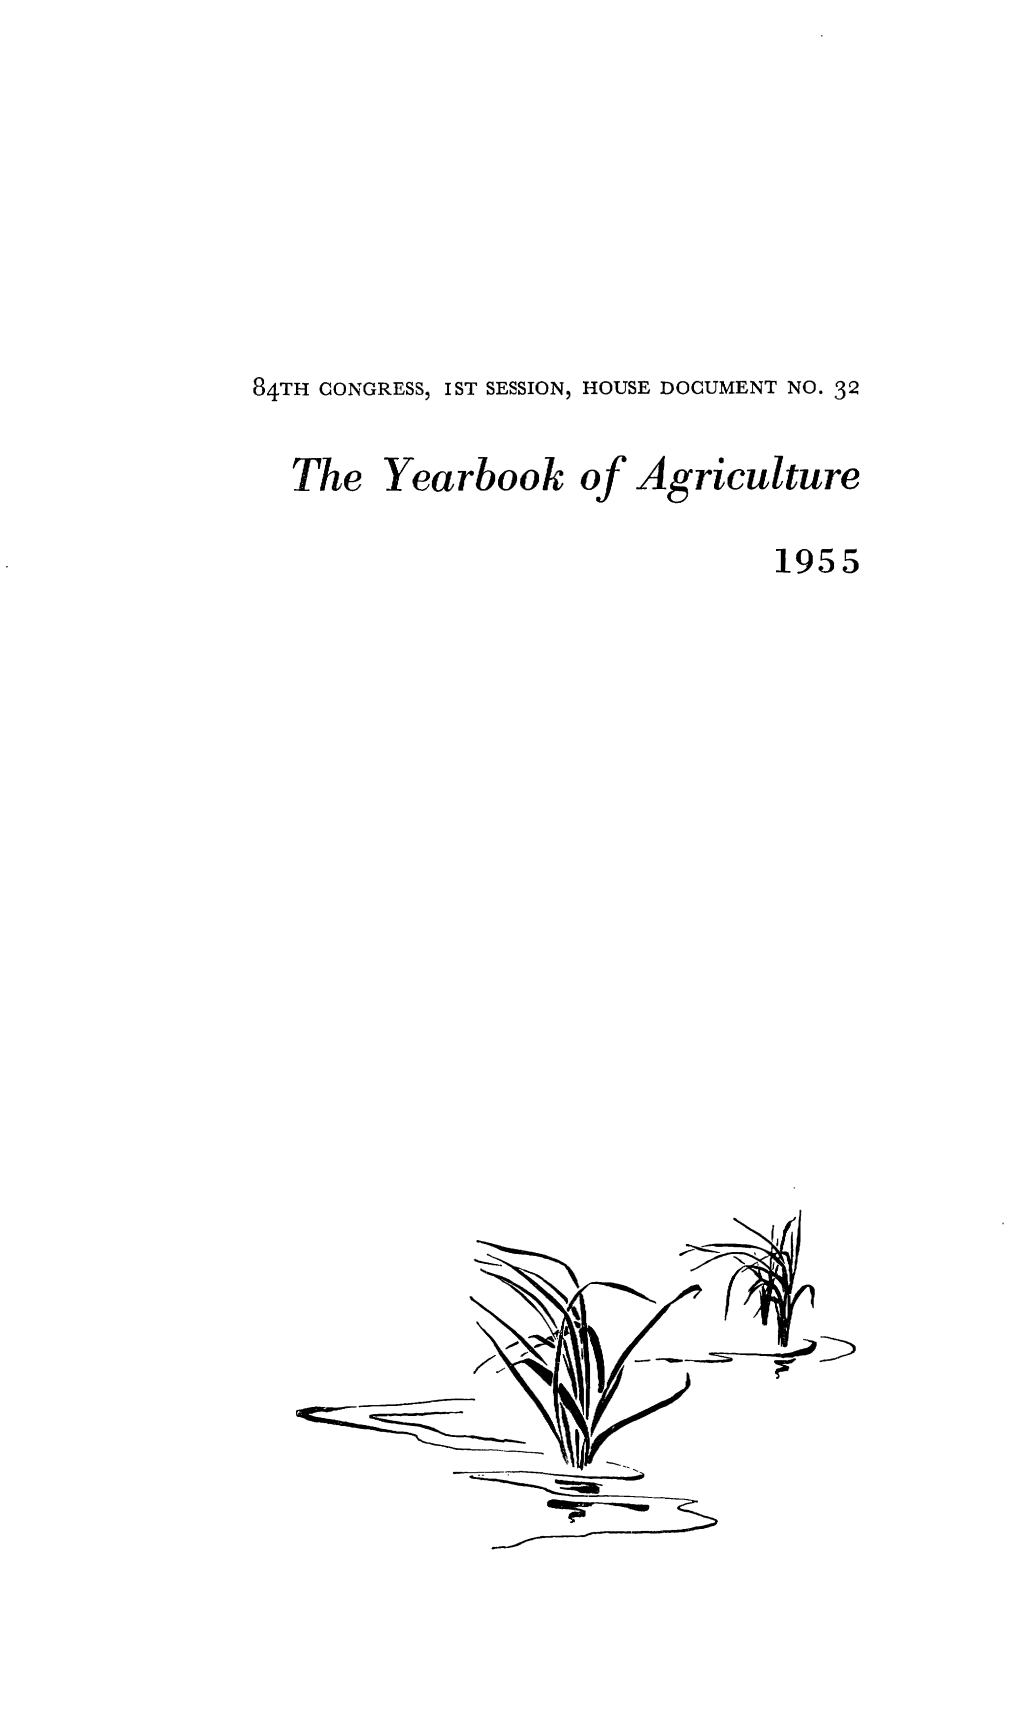 The Yearbook of Agriculture